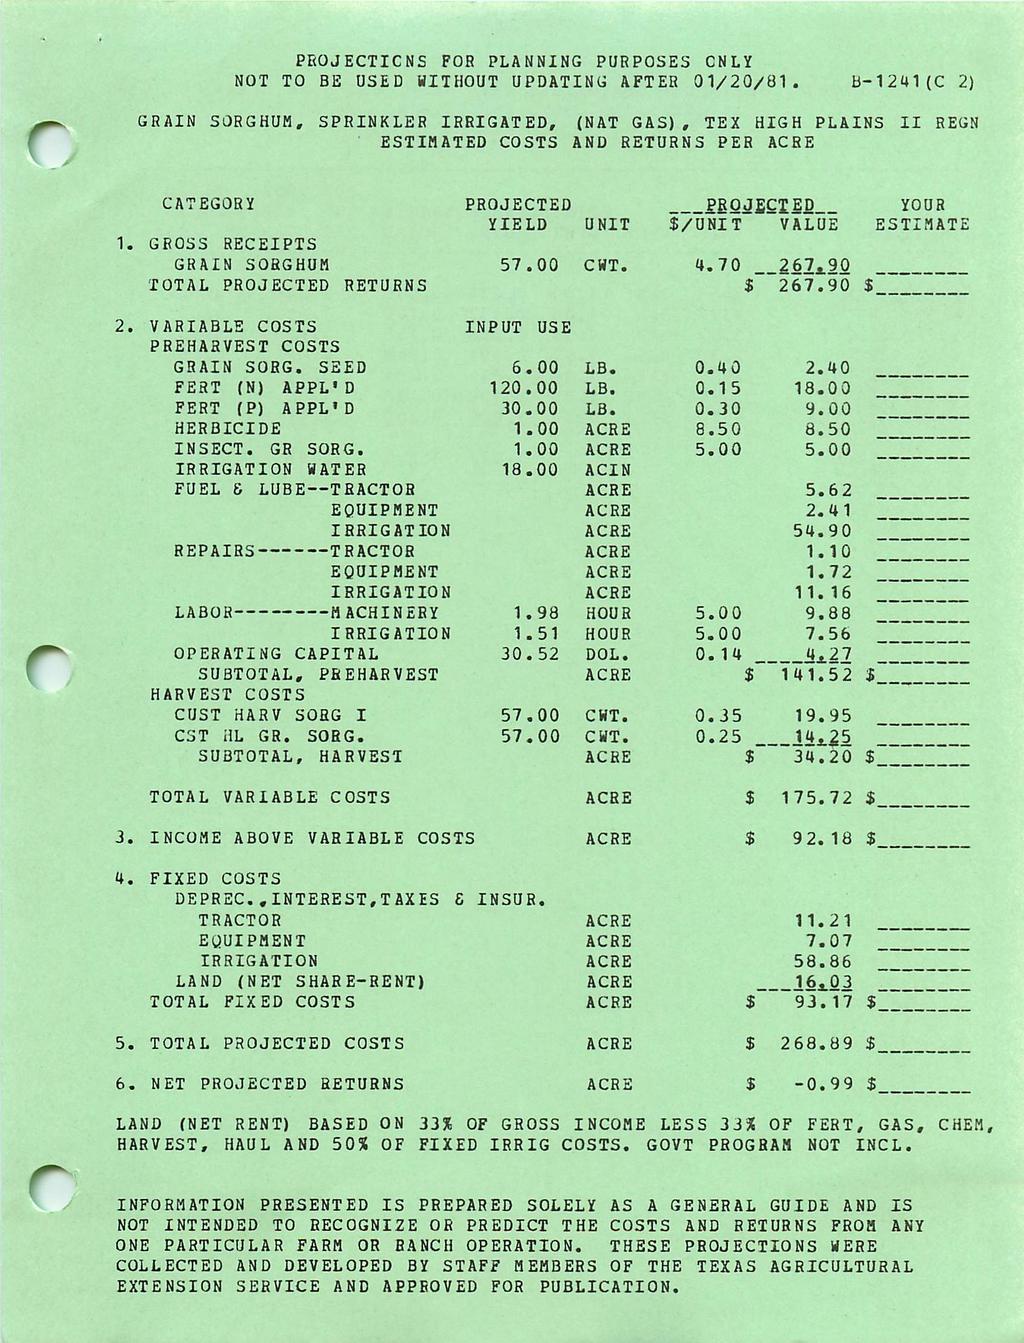 PROJECTIONS FOR PLANNING PURPOSES ONLY NOT TO BE USED WITHOUT UPDATING AFTER 01/20/81 B1241 (C 2) GRAIN SORGHUM, SPRINKLER IRRIGATED, (NAT GAS), TEX HIGH PLAINS II REGN ESTIMATED COSTS AND RETURNS